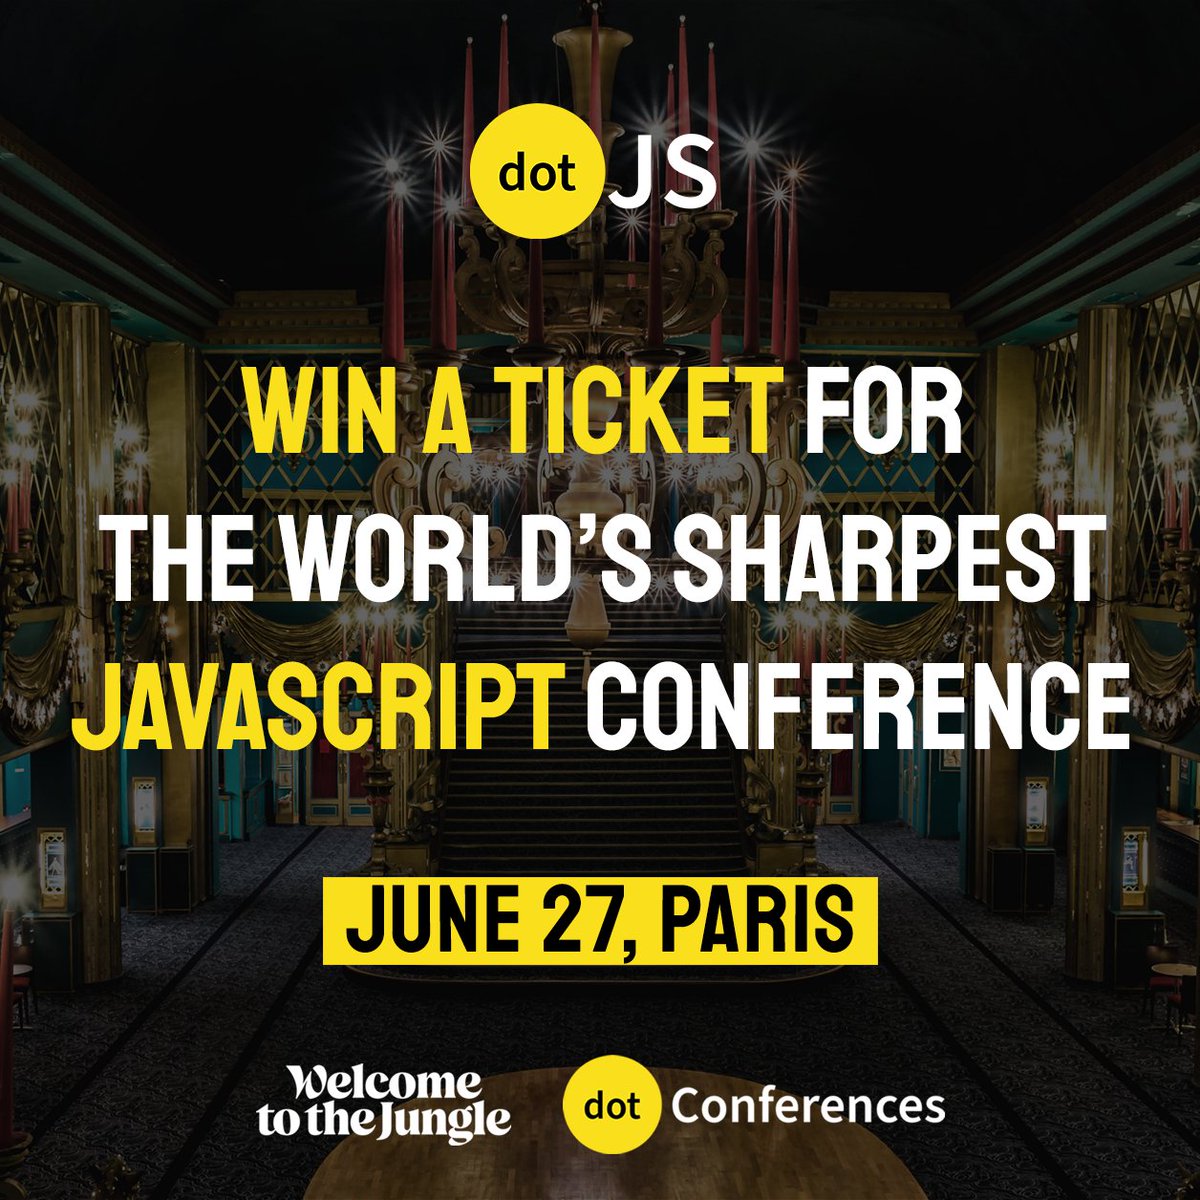 ✨ Join us at DotJS! ✨

Heading to DotJS on June 27th in Paris and we've got an extra ticket! Want to join us? To participate, reply with the topic you're eager to explore at DotJS. Winner announced next Tuesday, May 21! 🎟️

#DotJS #JavaScript #DevCommunity #TechEvent